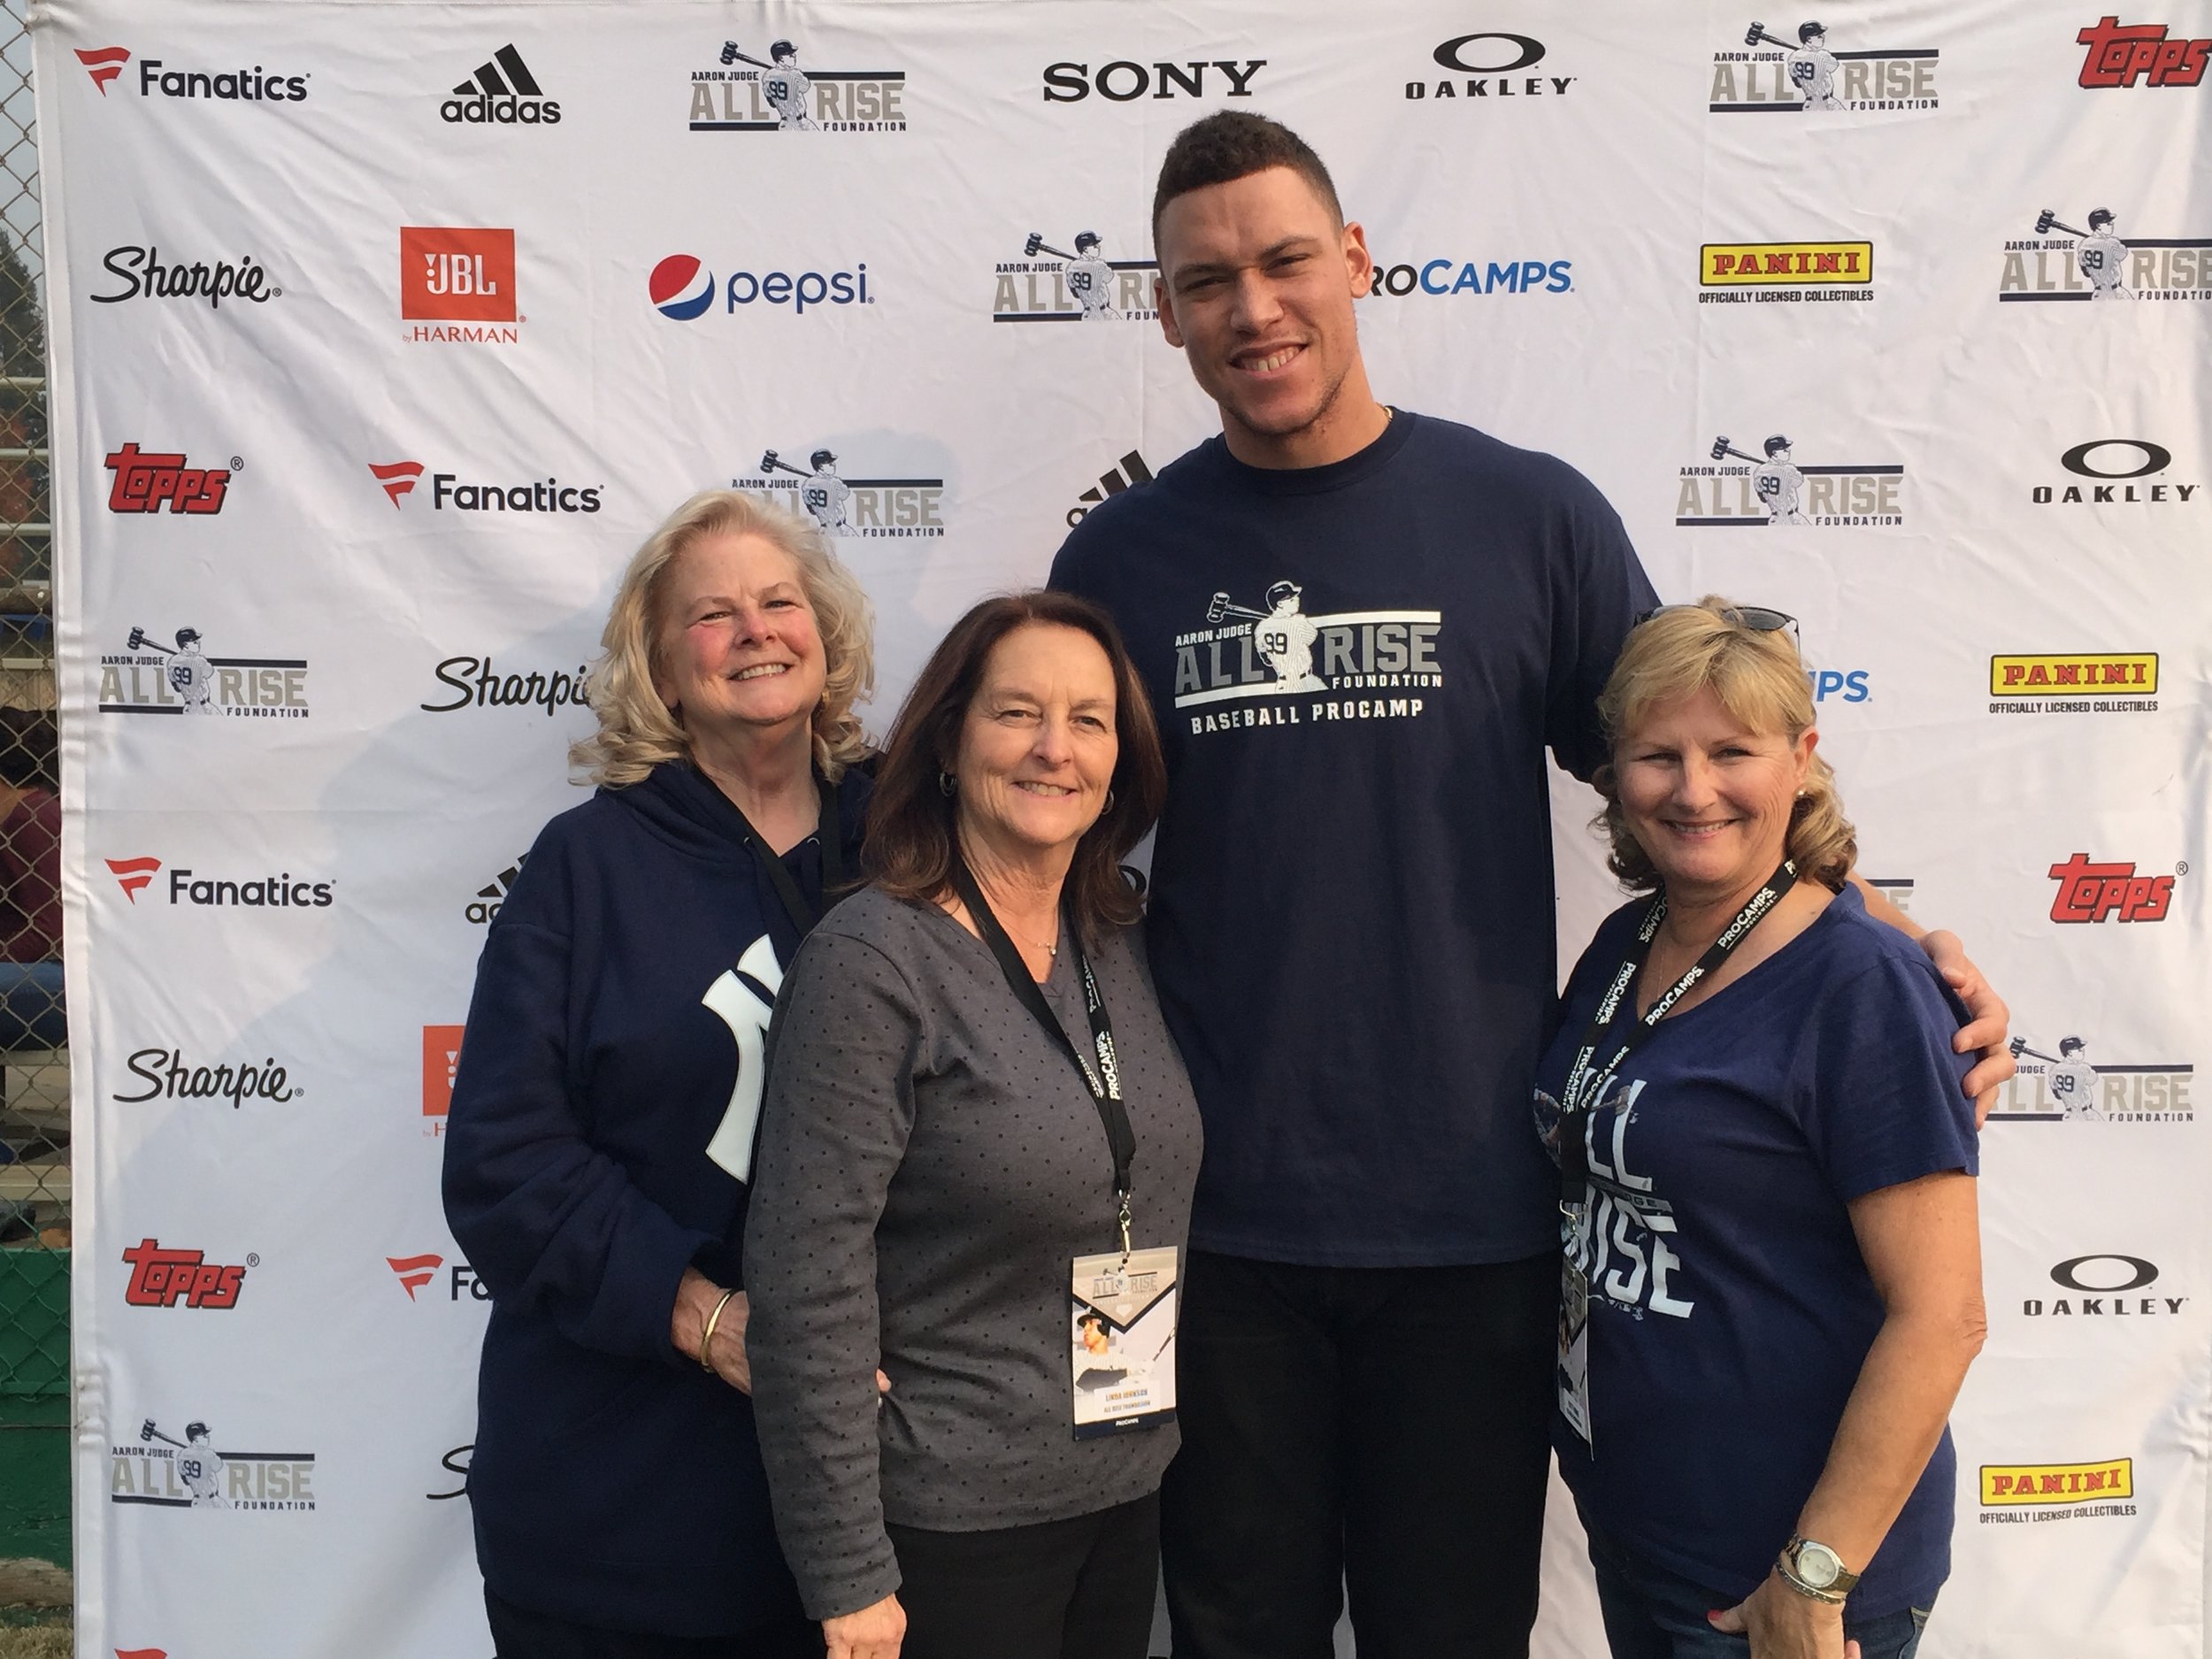 Aaron Judge All Rise Foundation